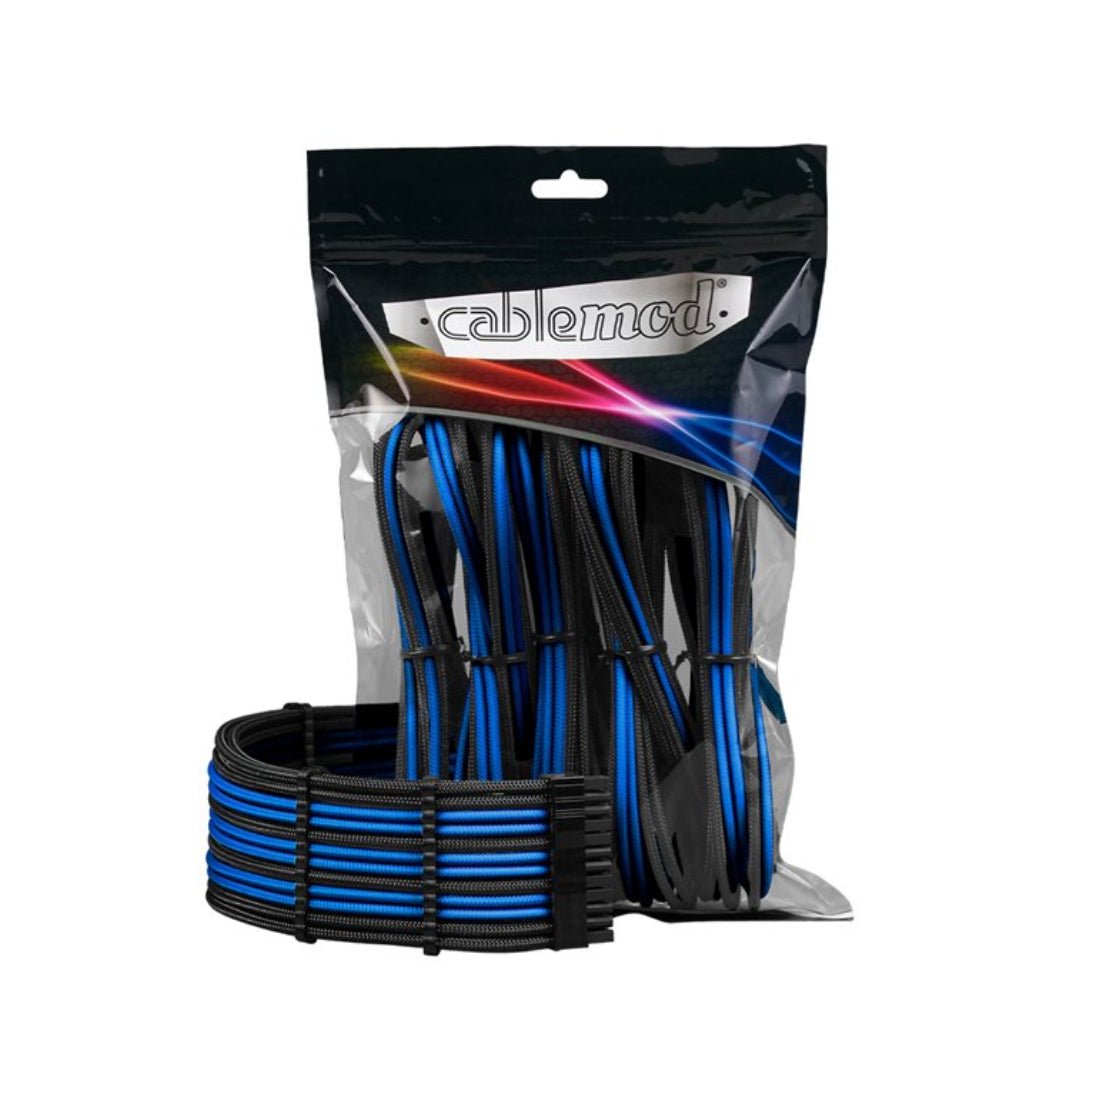 CableMod Pro ModMesh Sleeved 12VHPWR StealthSense Cable Extension Kit (Black & Blue, 16-pin to Triple 8-pin) - كابل - Store 974 | ستور ٩٧٤